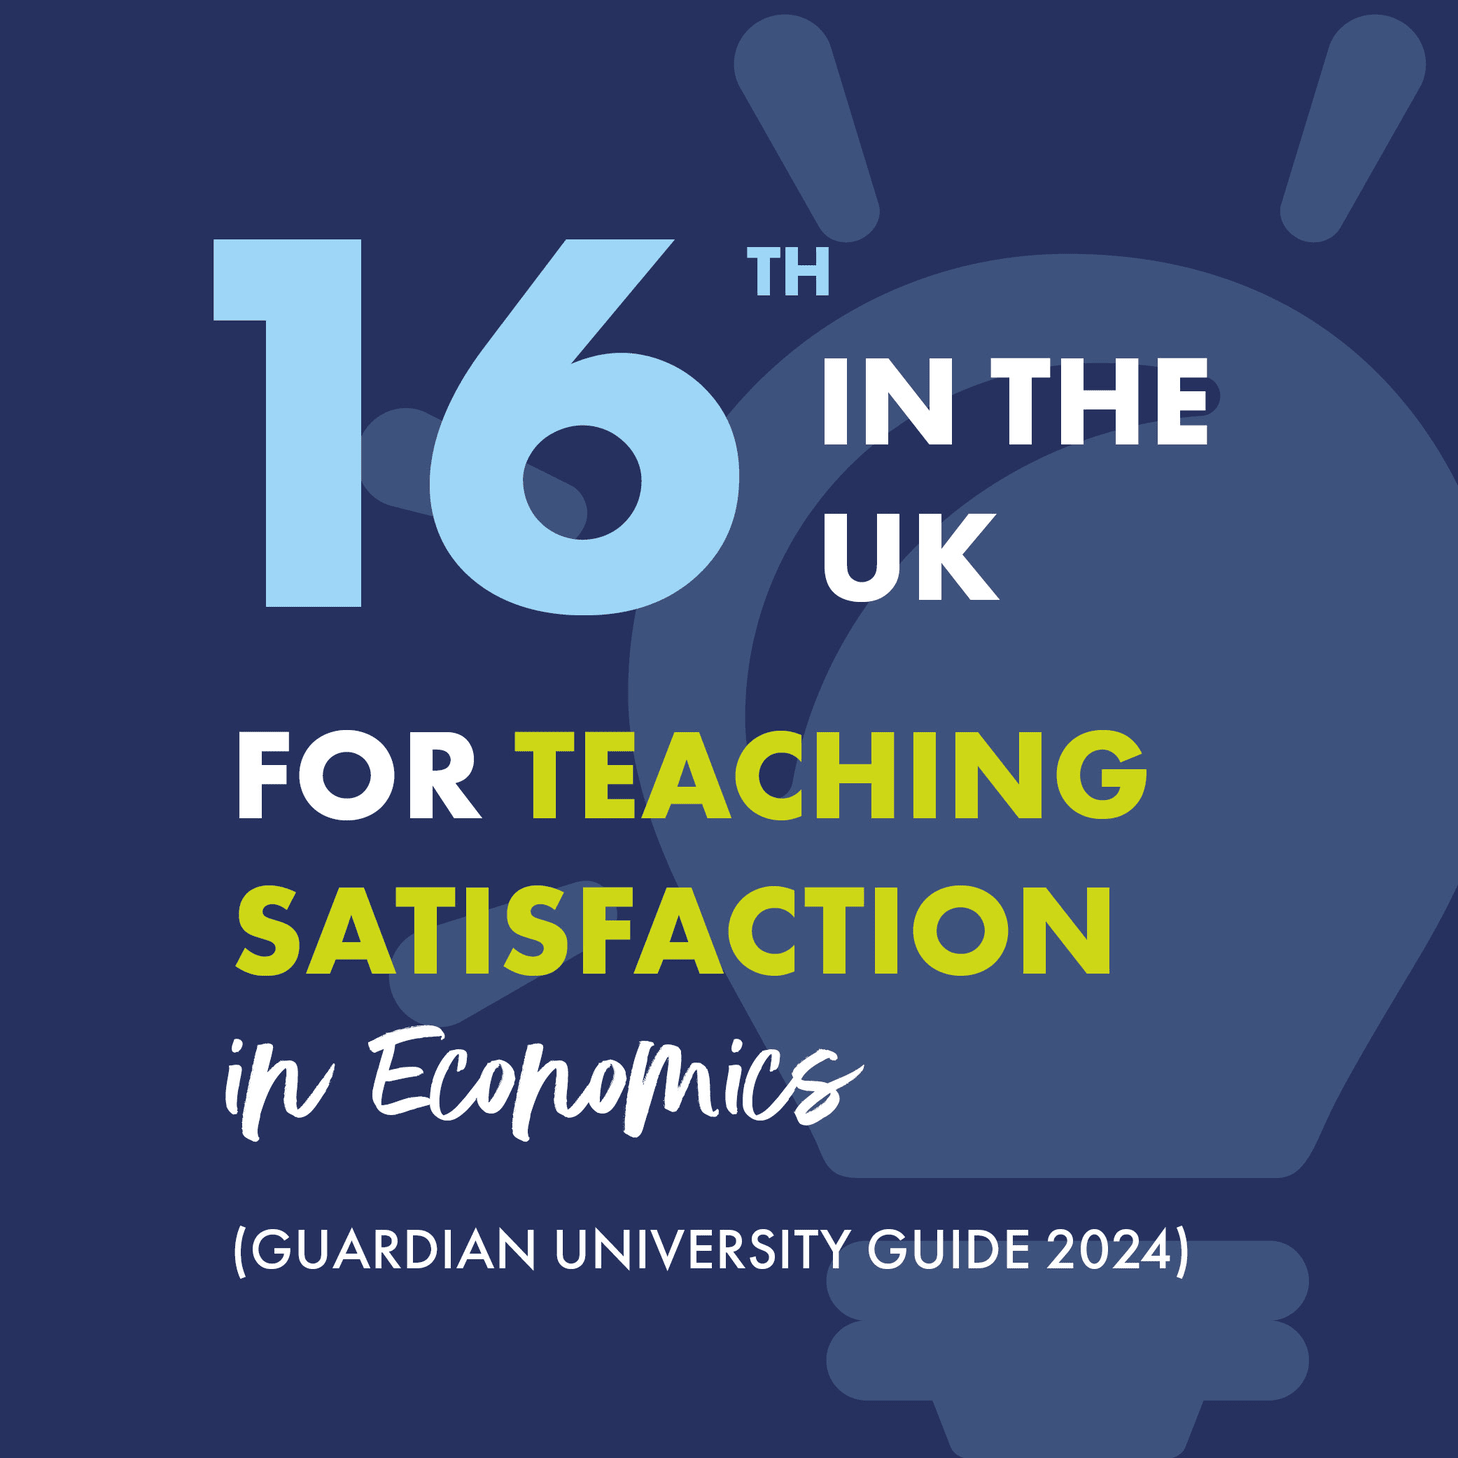 16th in the UK for Teaching